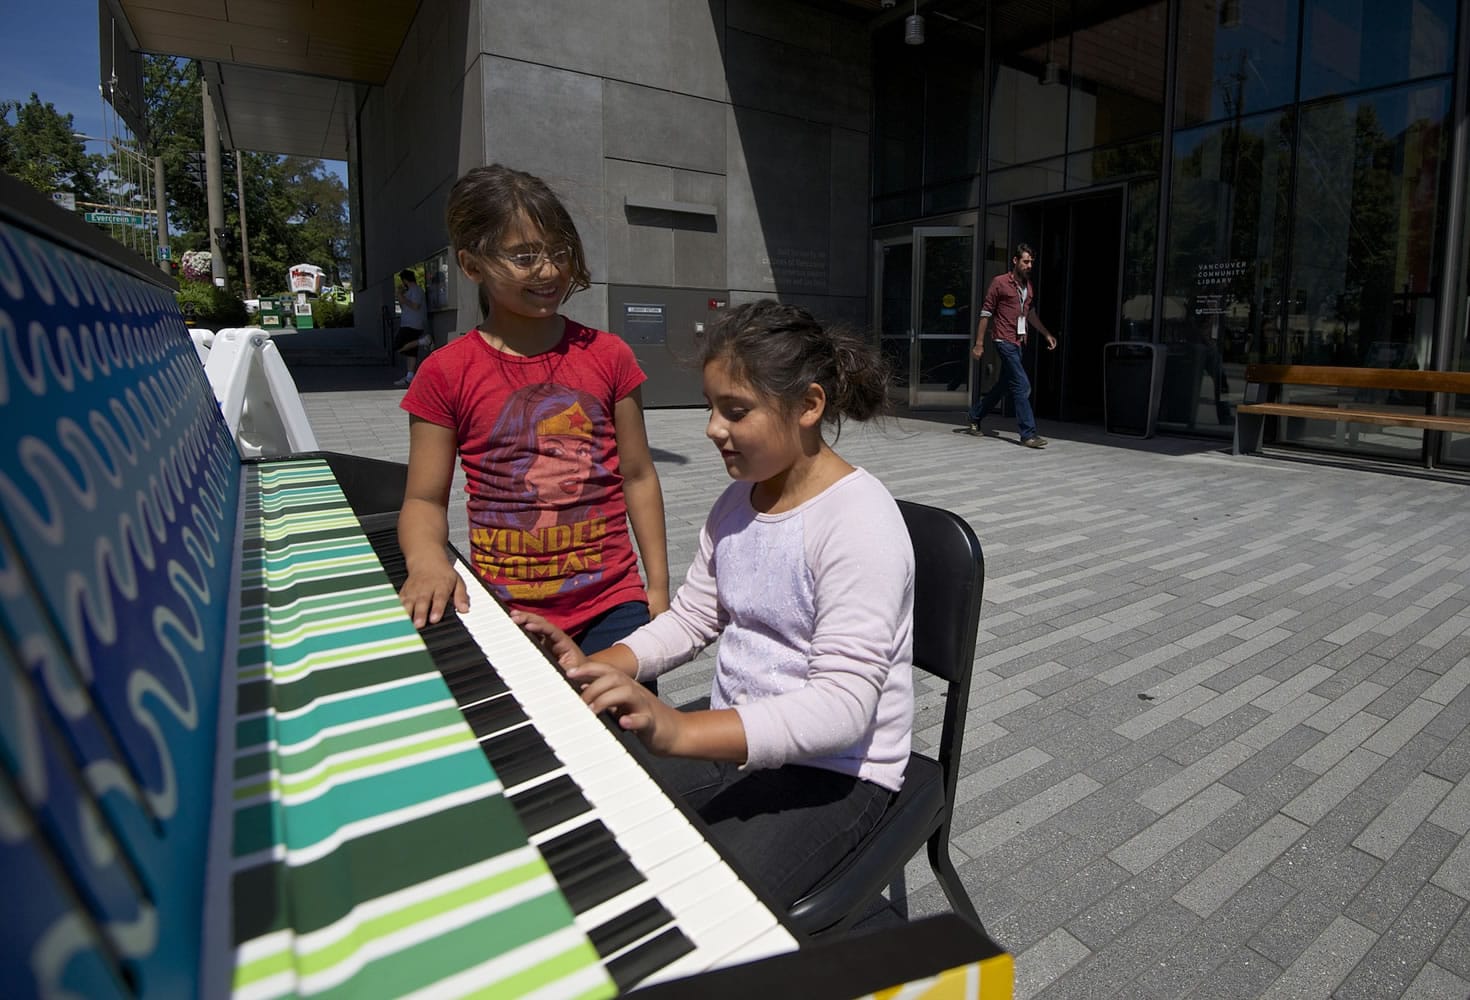 Edna Flores, center, and Christina Arales examine a piano in front of the Vancouver Community Library on Friday.